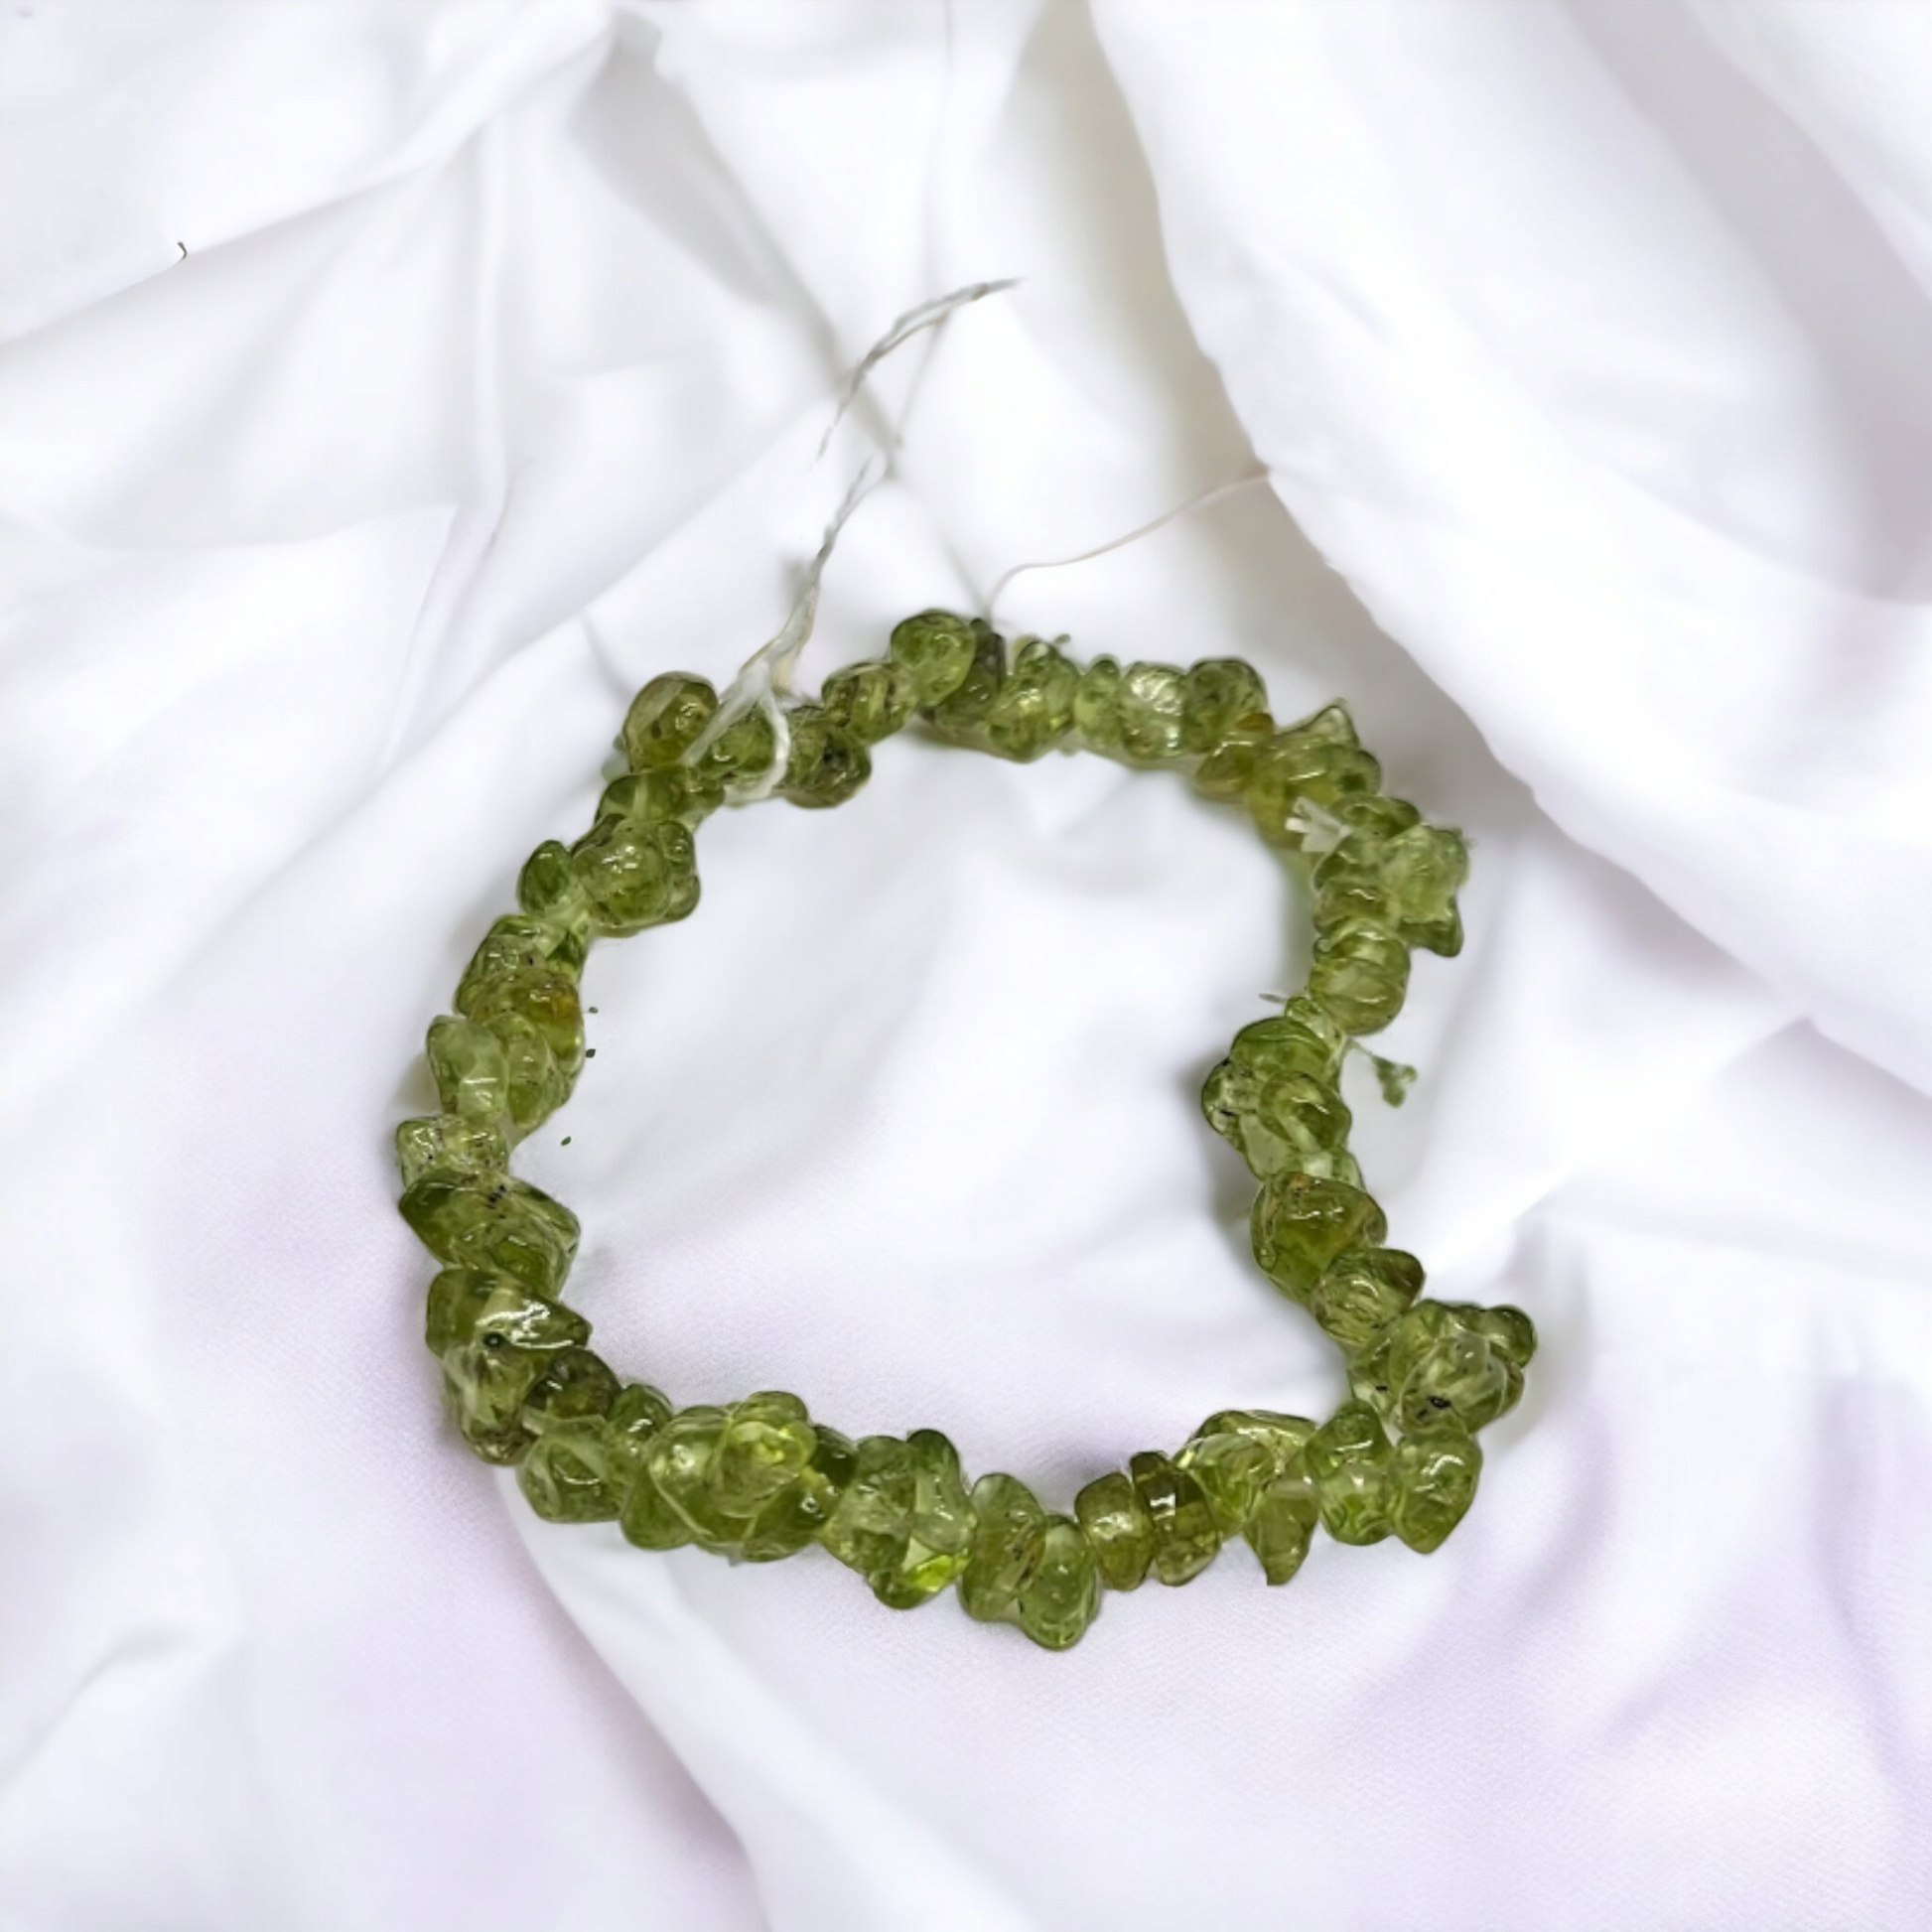 Green crystal jewellery called peridot sold at Mind Soul Sync crystal jewellery shop Australia.